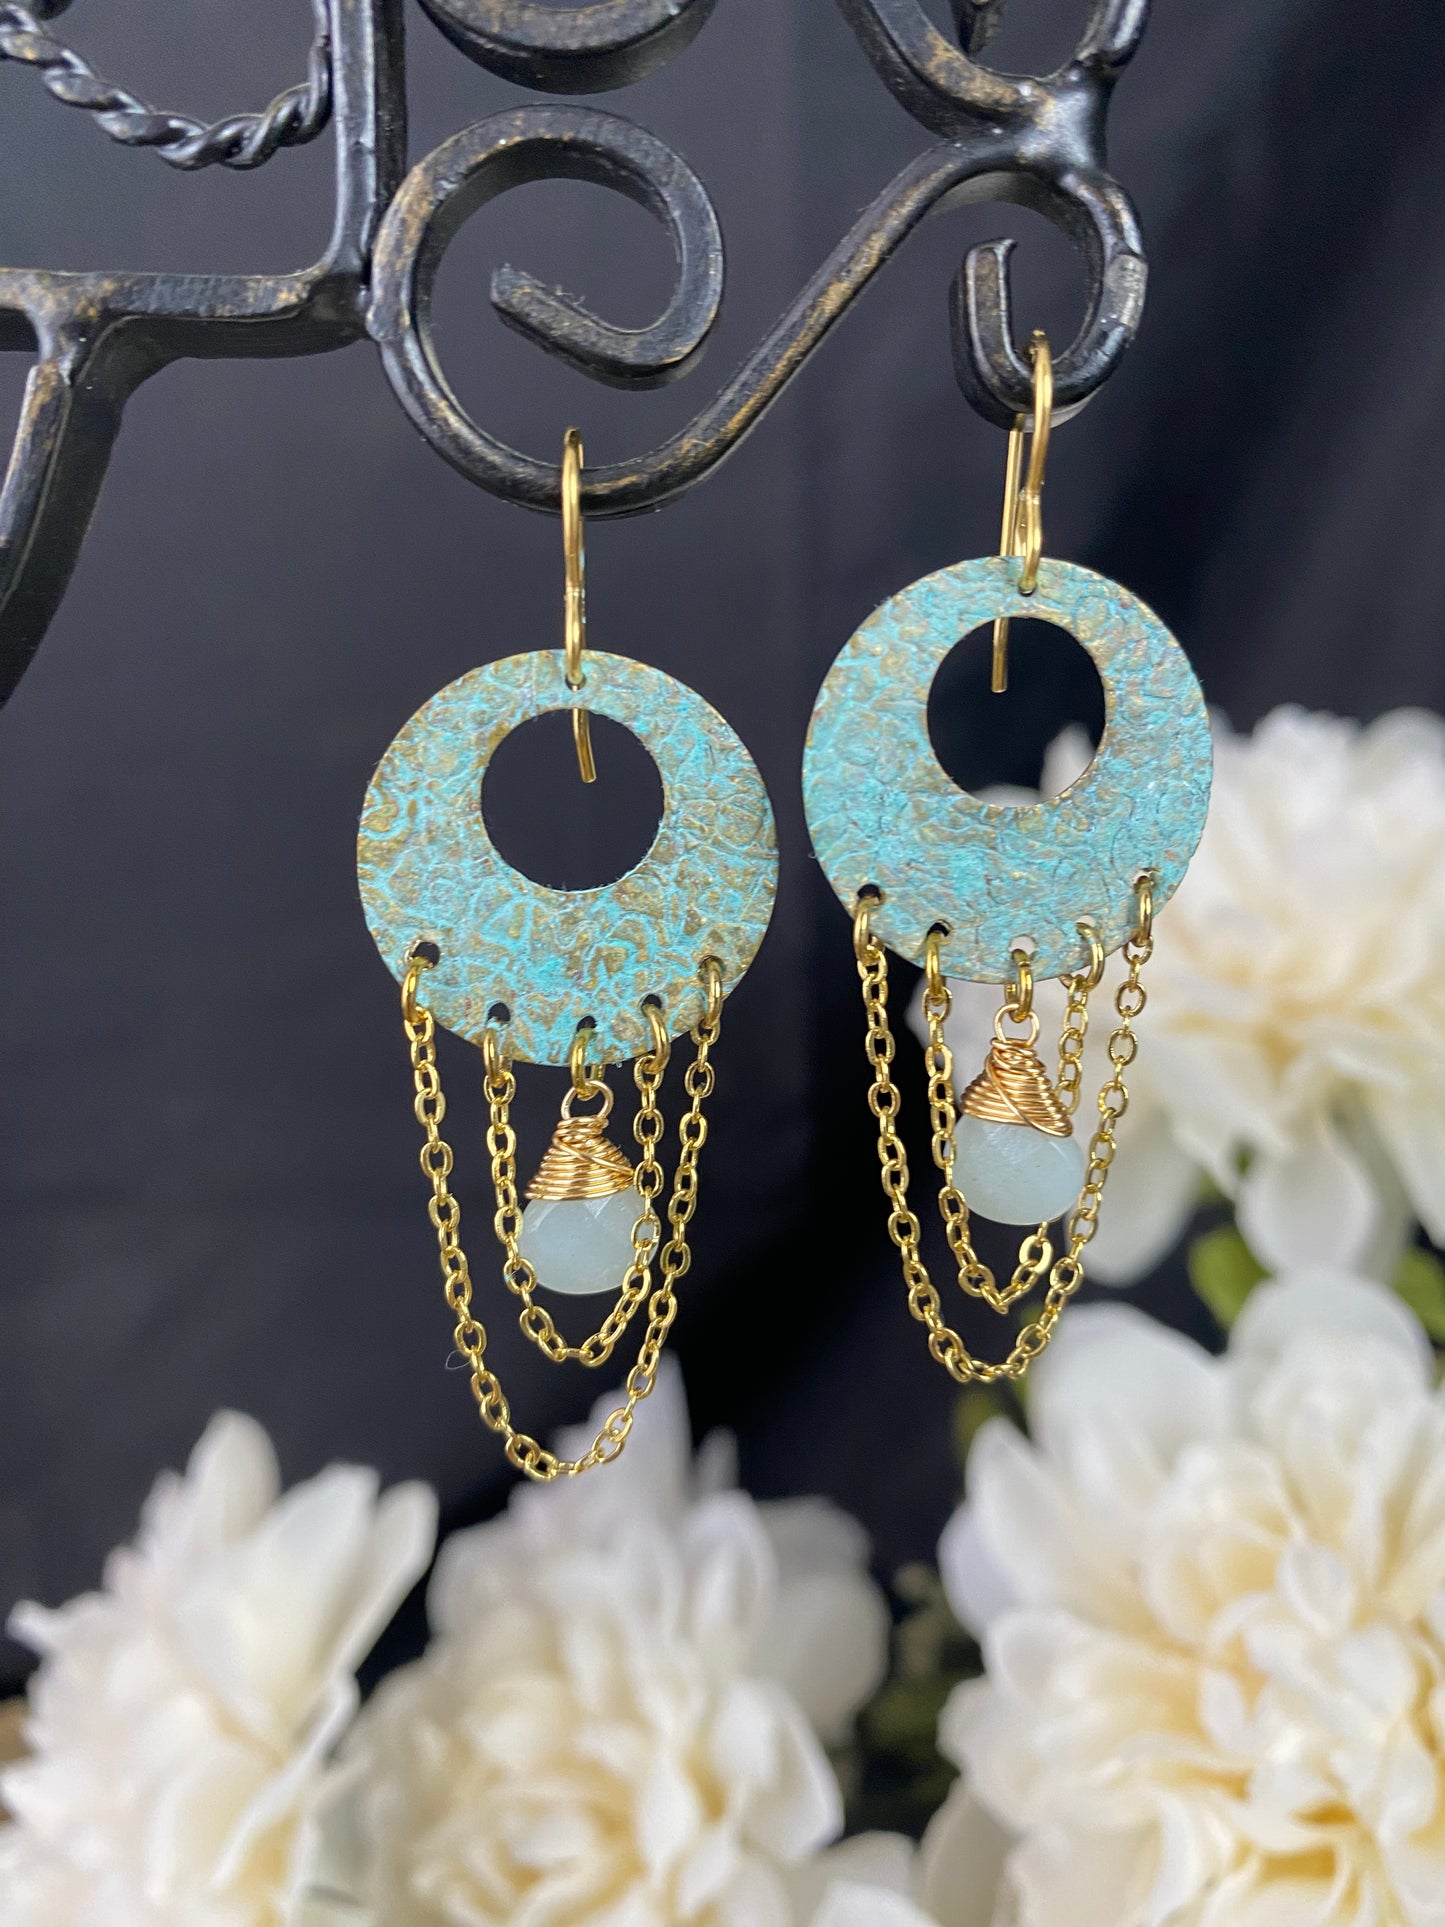 Amazonite stone, charms with blue patina, chain, gold metal, earrings